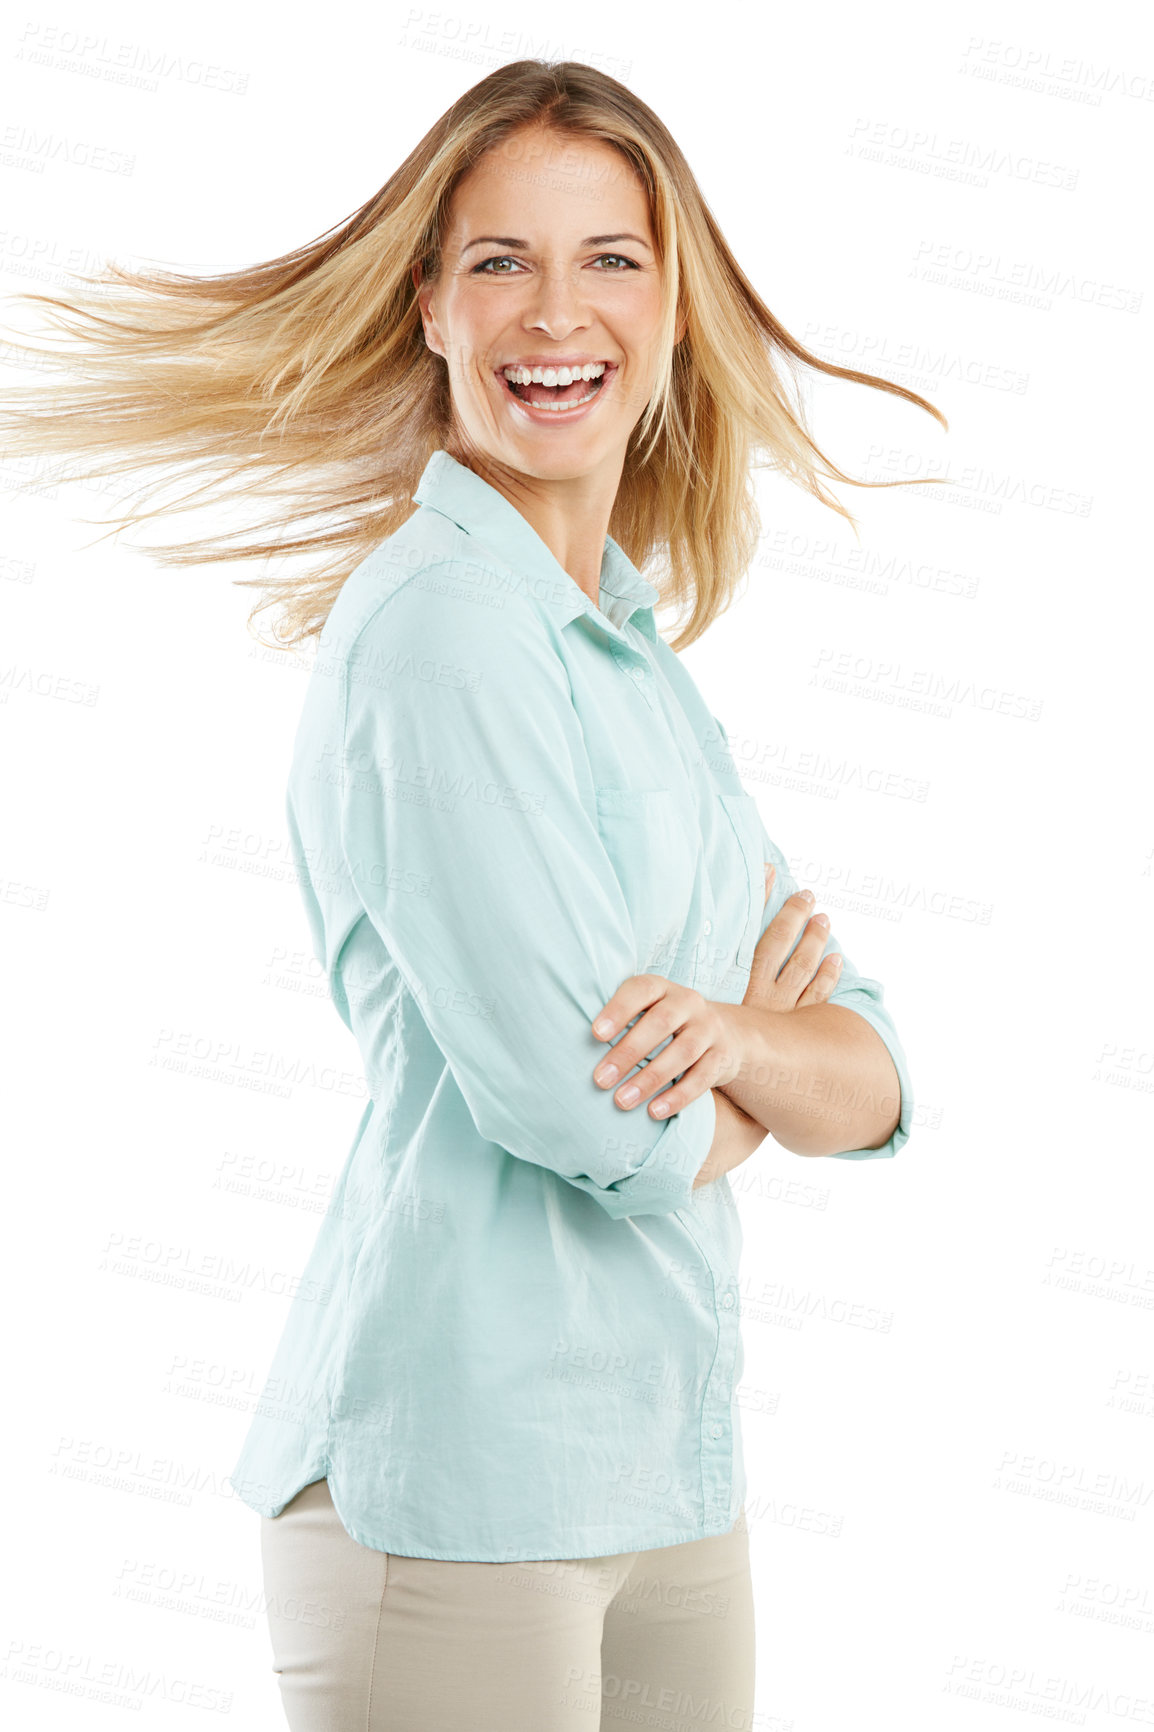 Buy stock photo Shot of a happy woman flipping her hair against a white background